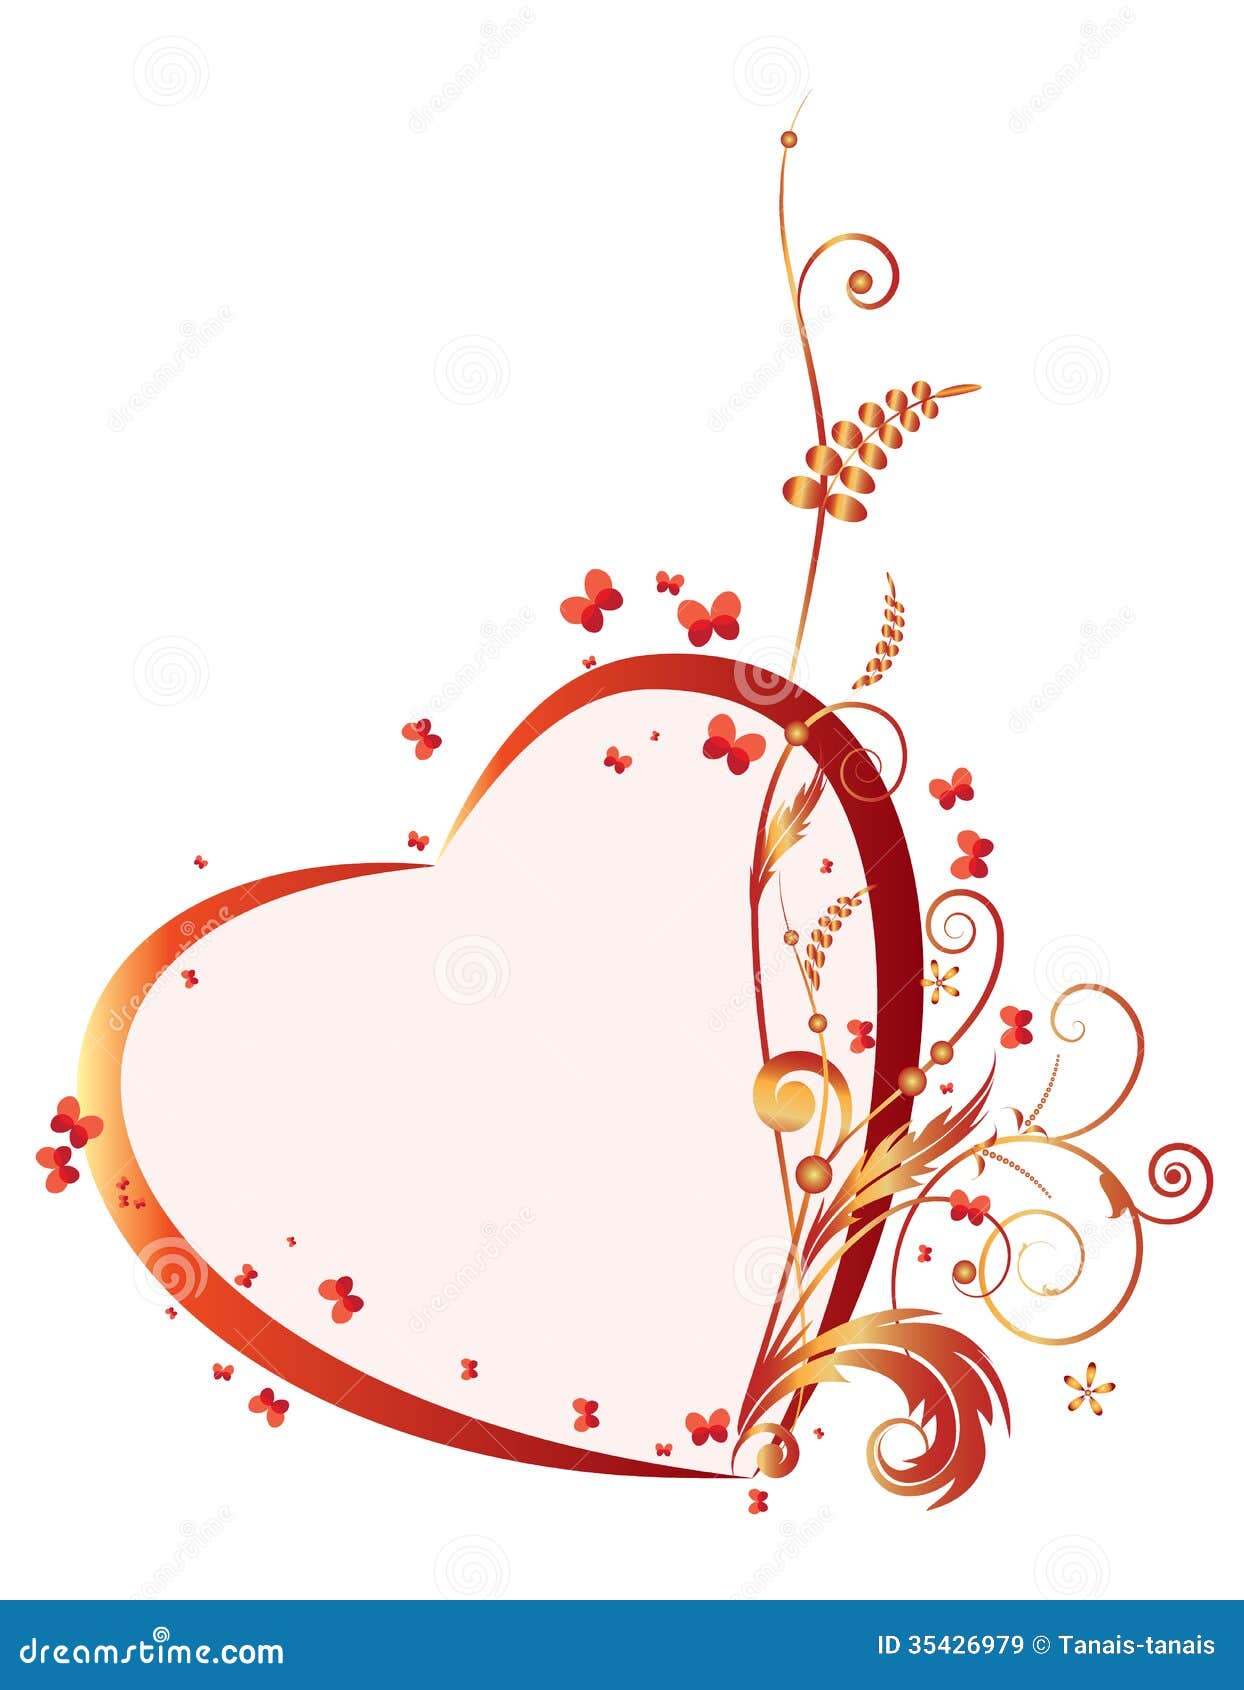 Valentine frame stock vector. Illustration of isolated - 35426979